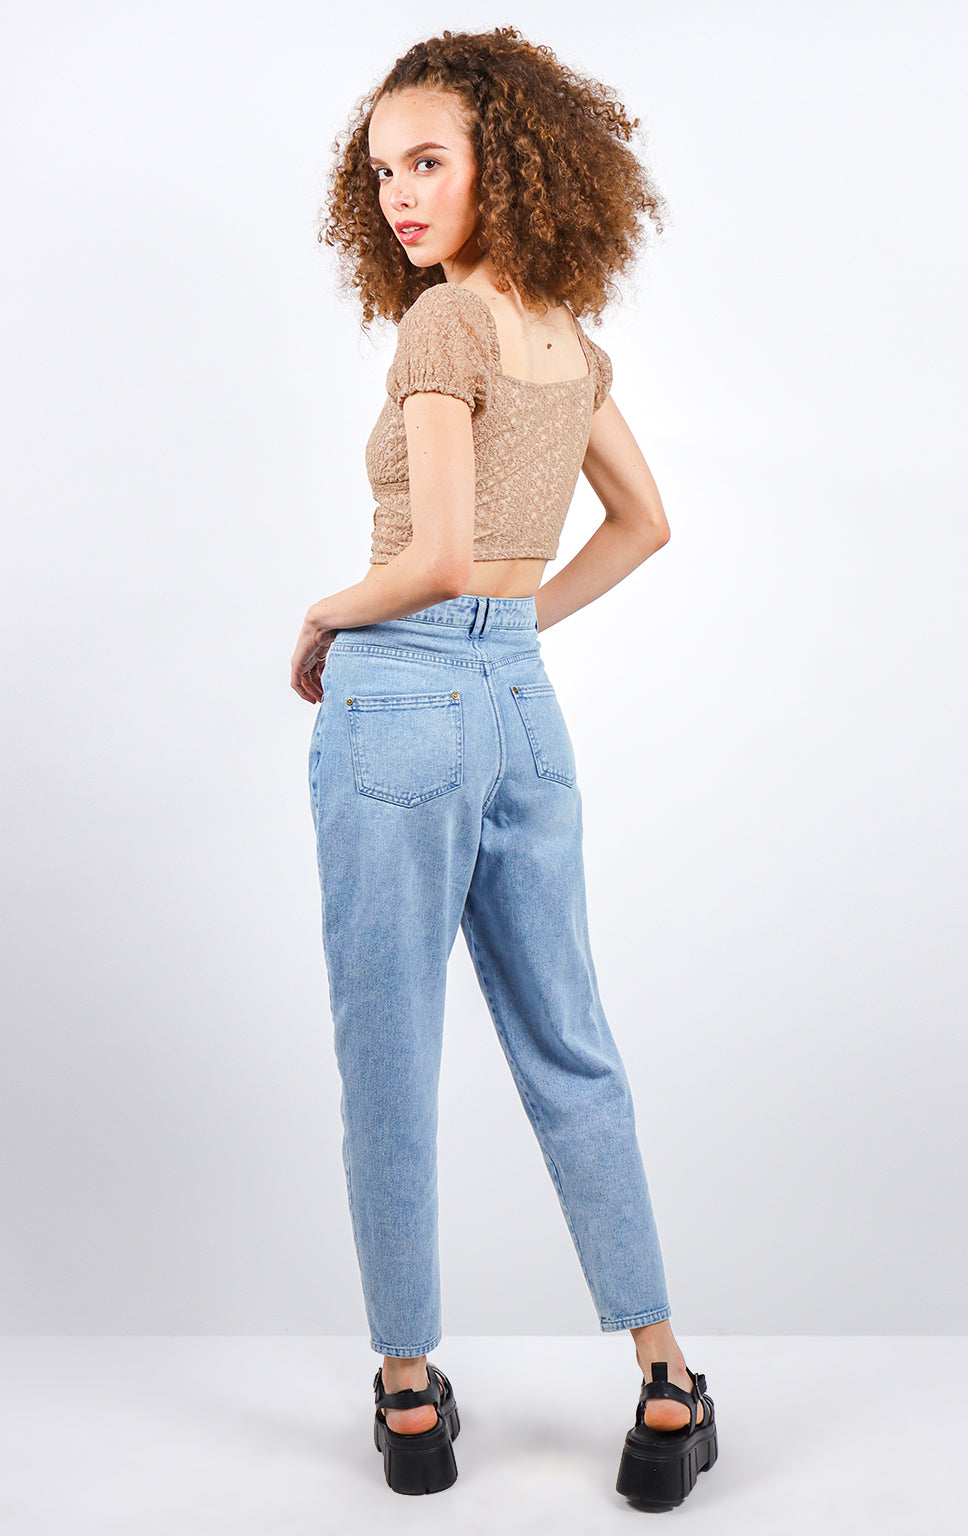 HIGH WAISTED BALOON FIT DENIM JEANS WITH CUT AND SEW DETAIL